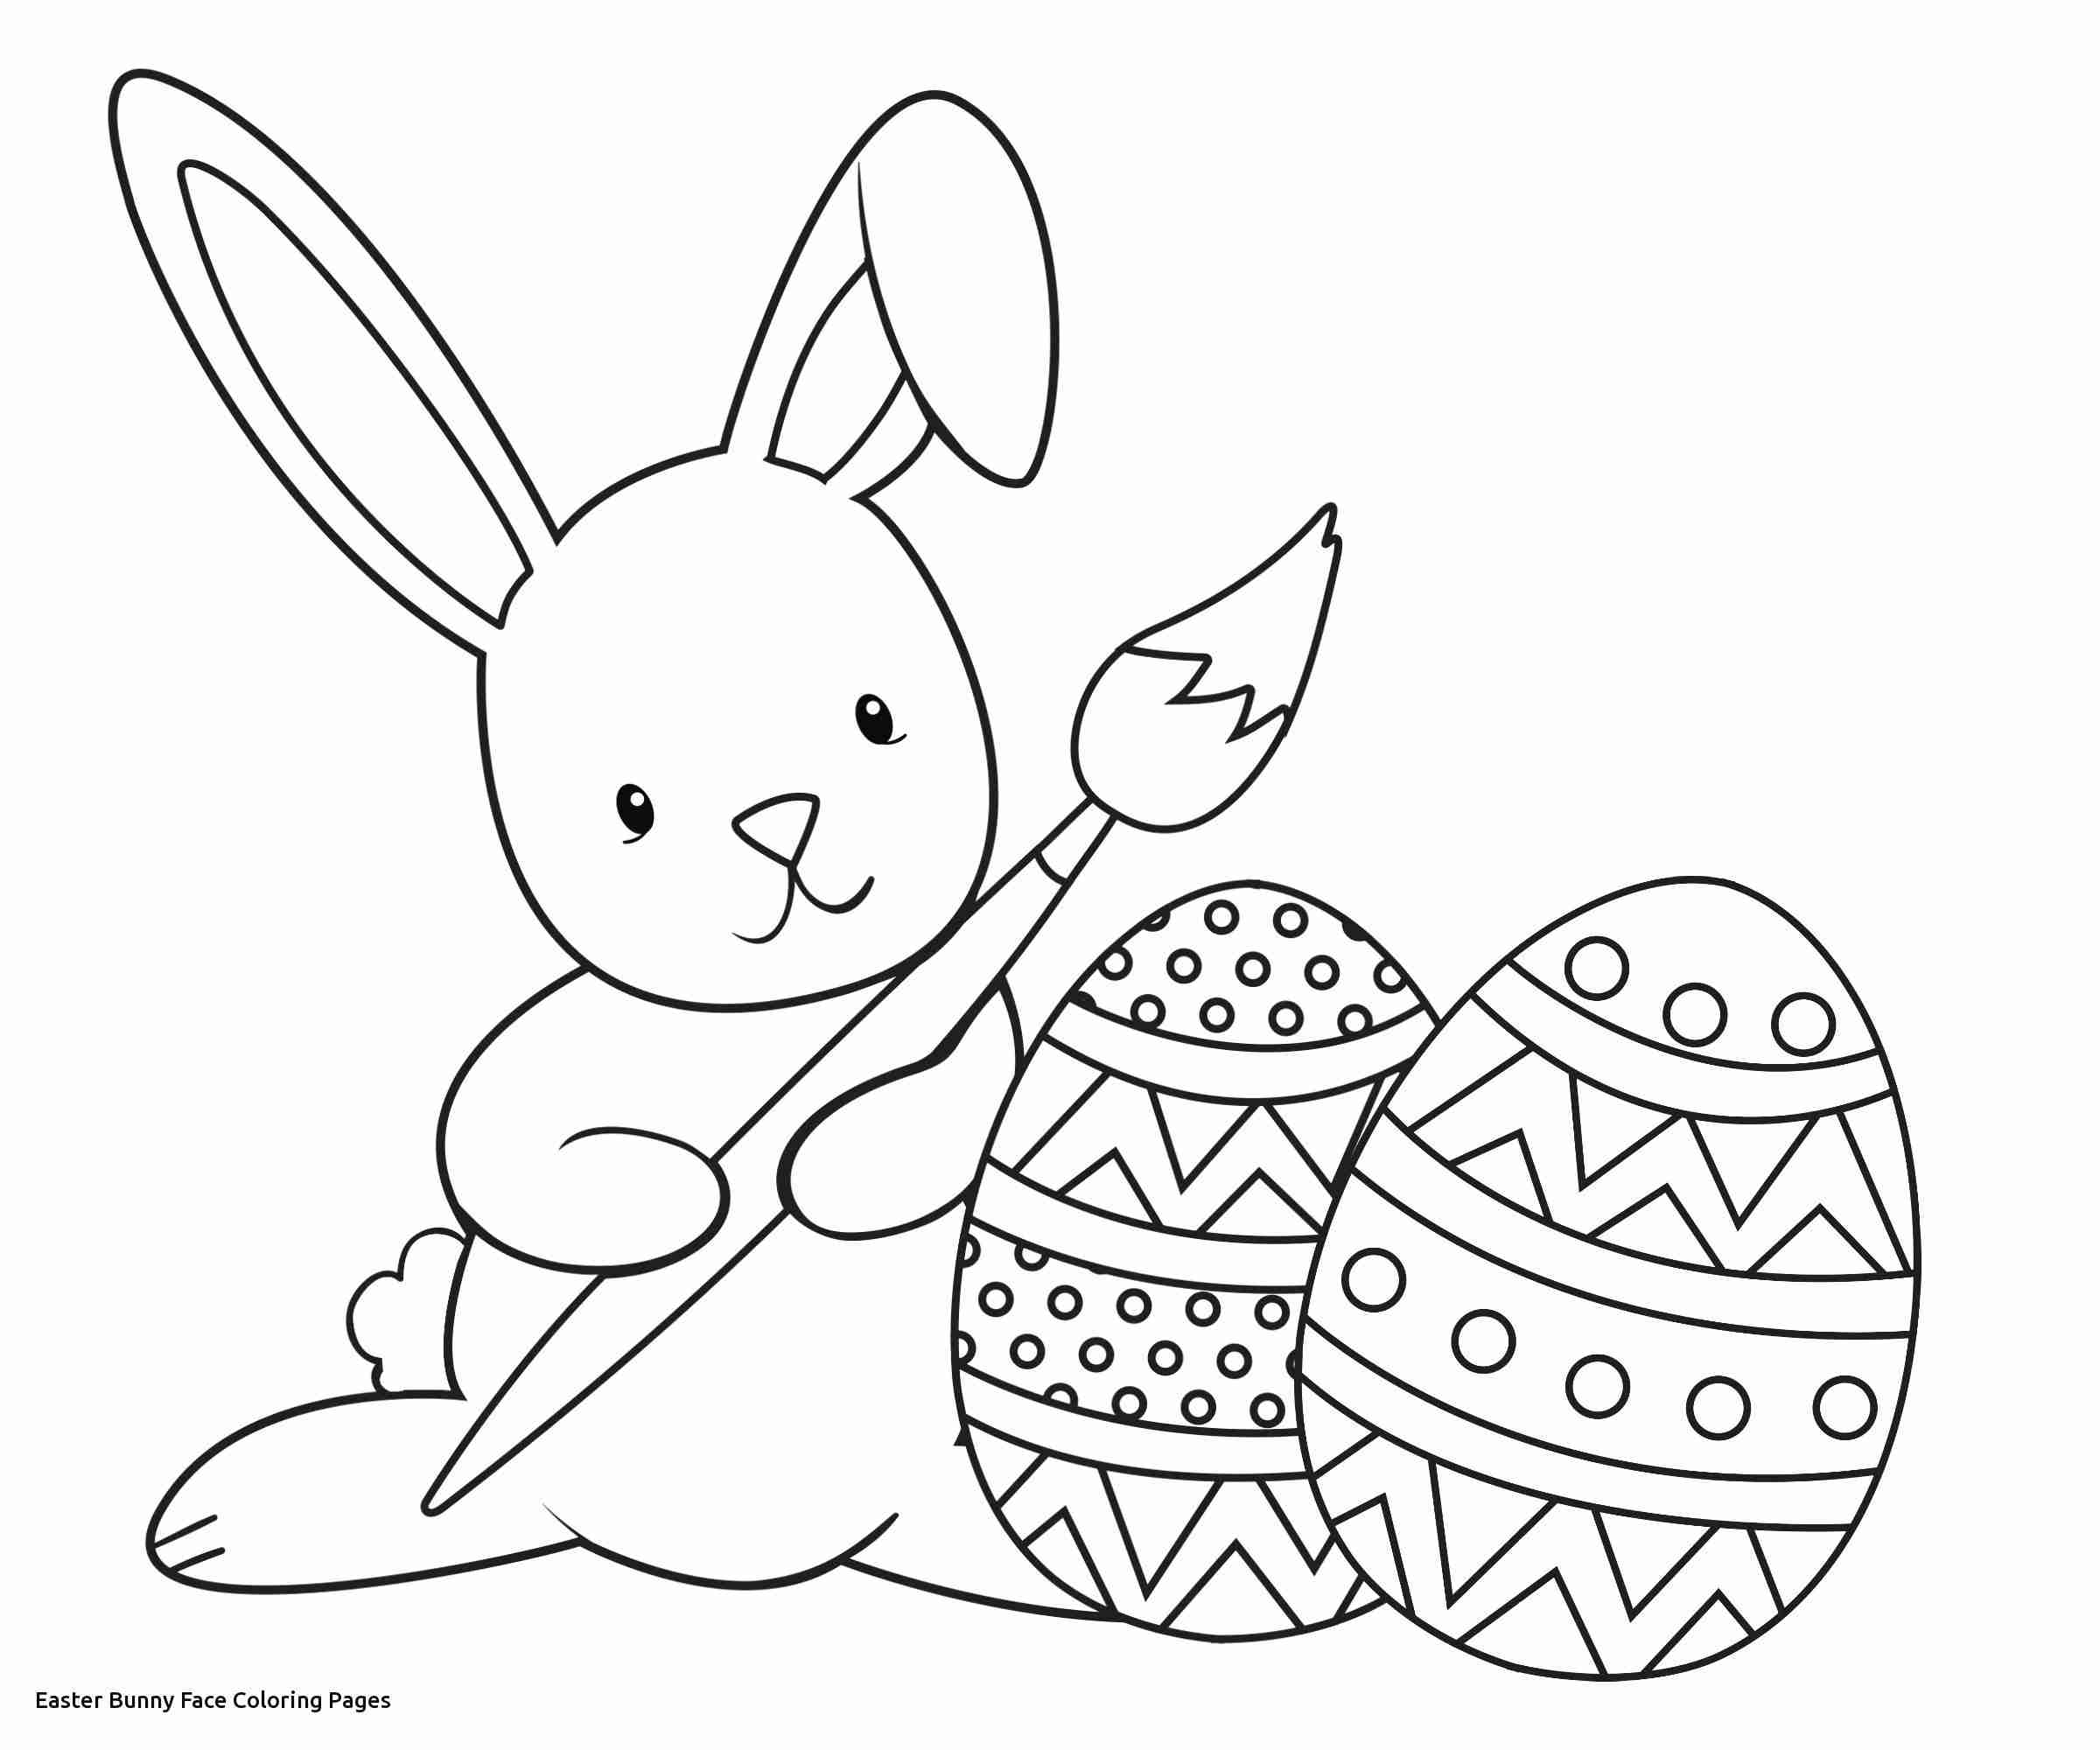 Easter Bunny Face Coloring Pages at GetColorings.com | Free printable